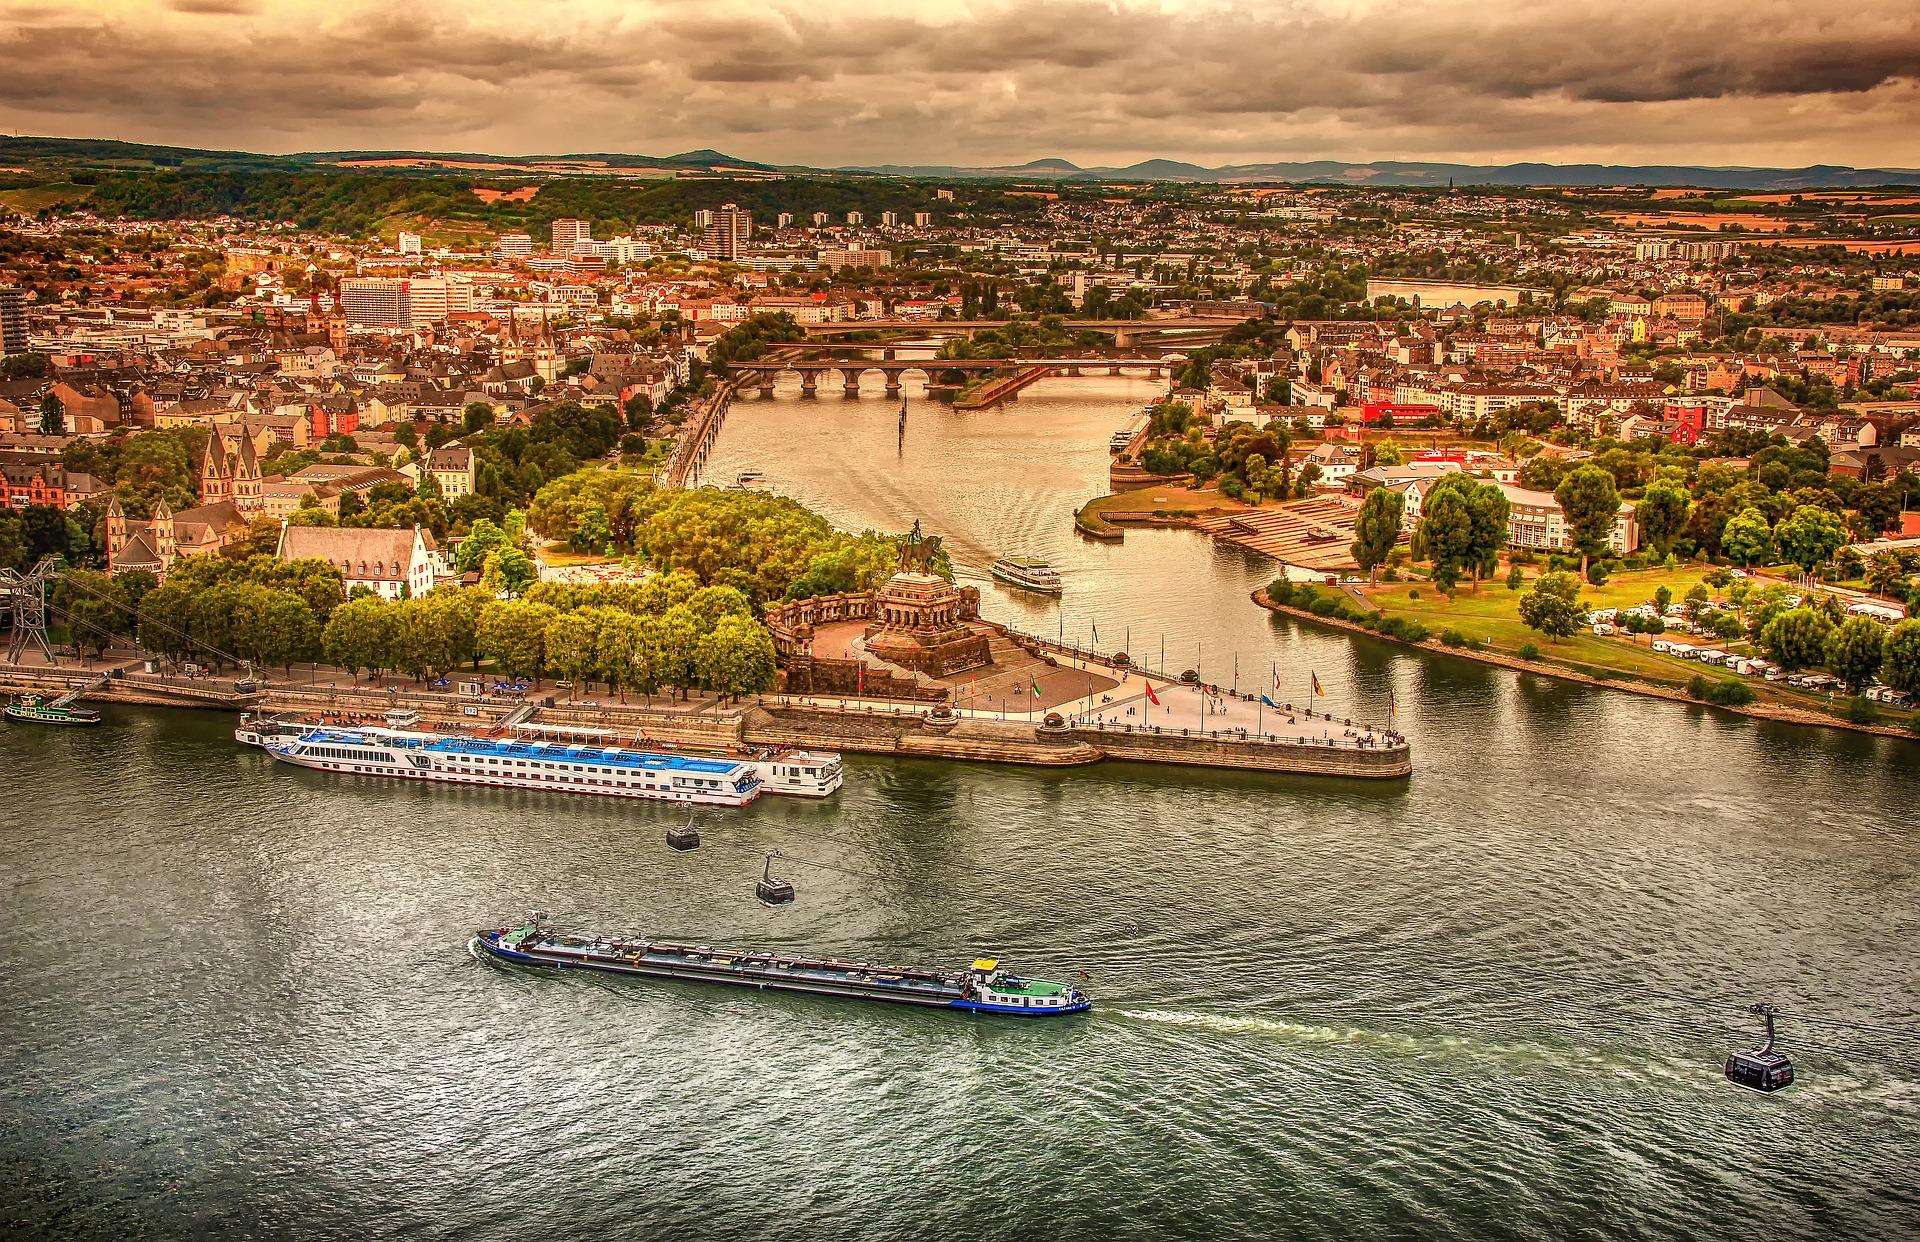 The 10 Best Rhine River Cruises 2021/2022 (with 1,261 Reviews)